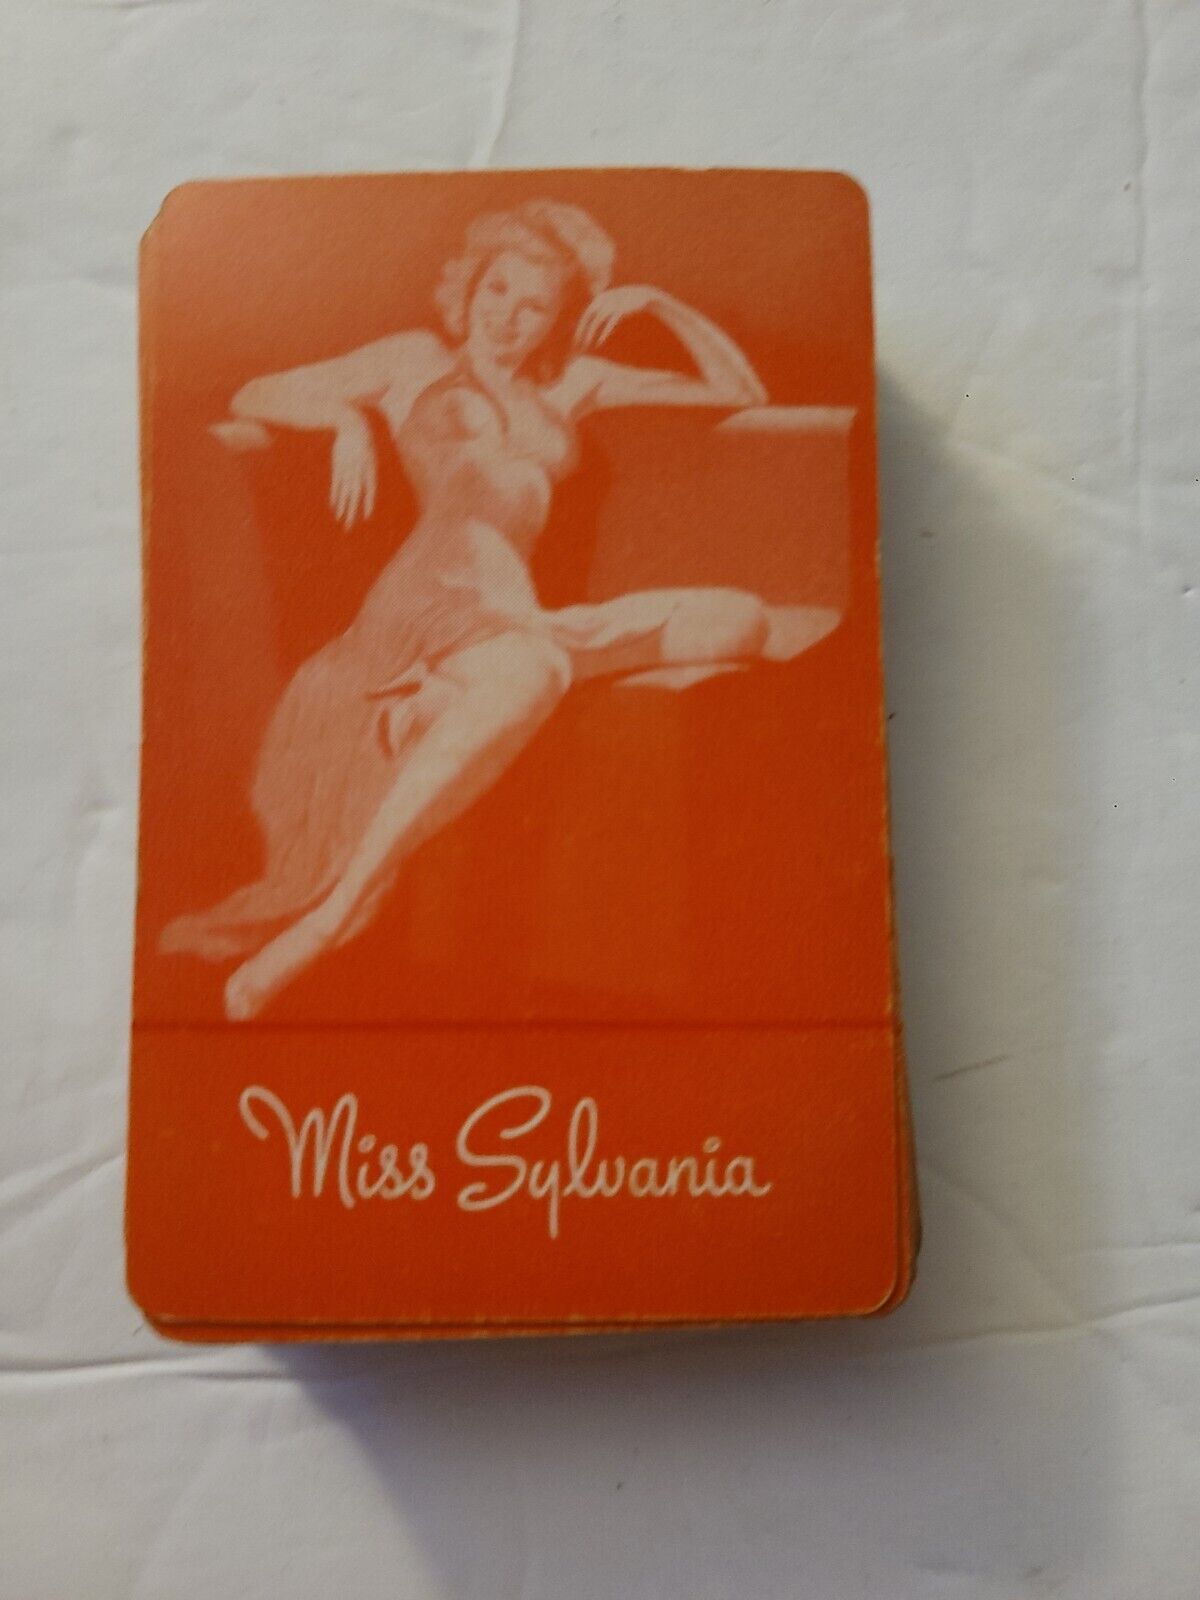 Brown & Bigelow “Miss Sylvania” Pin-Up Playing Cards 49B One Deck Complete